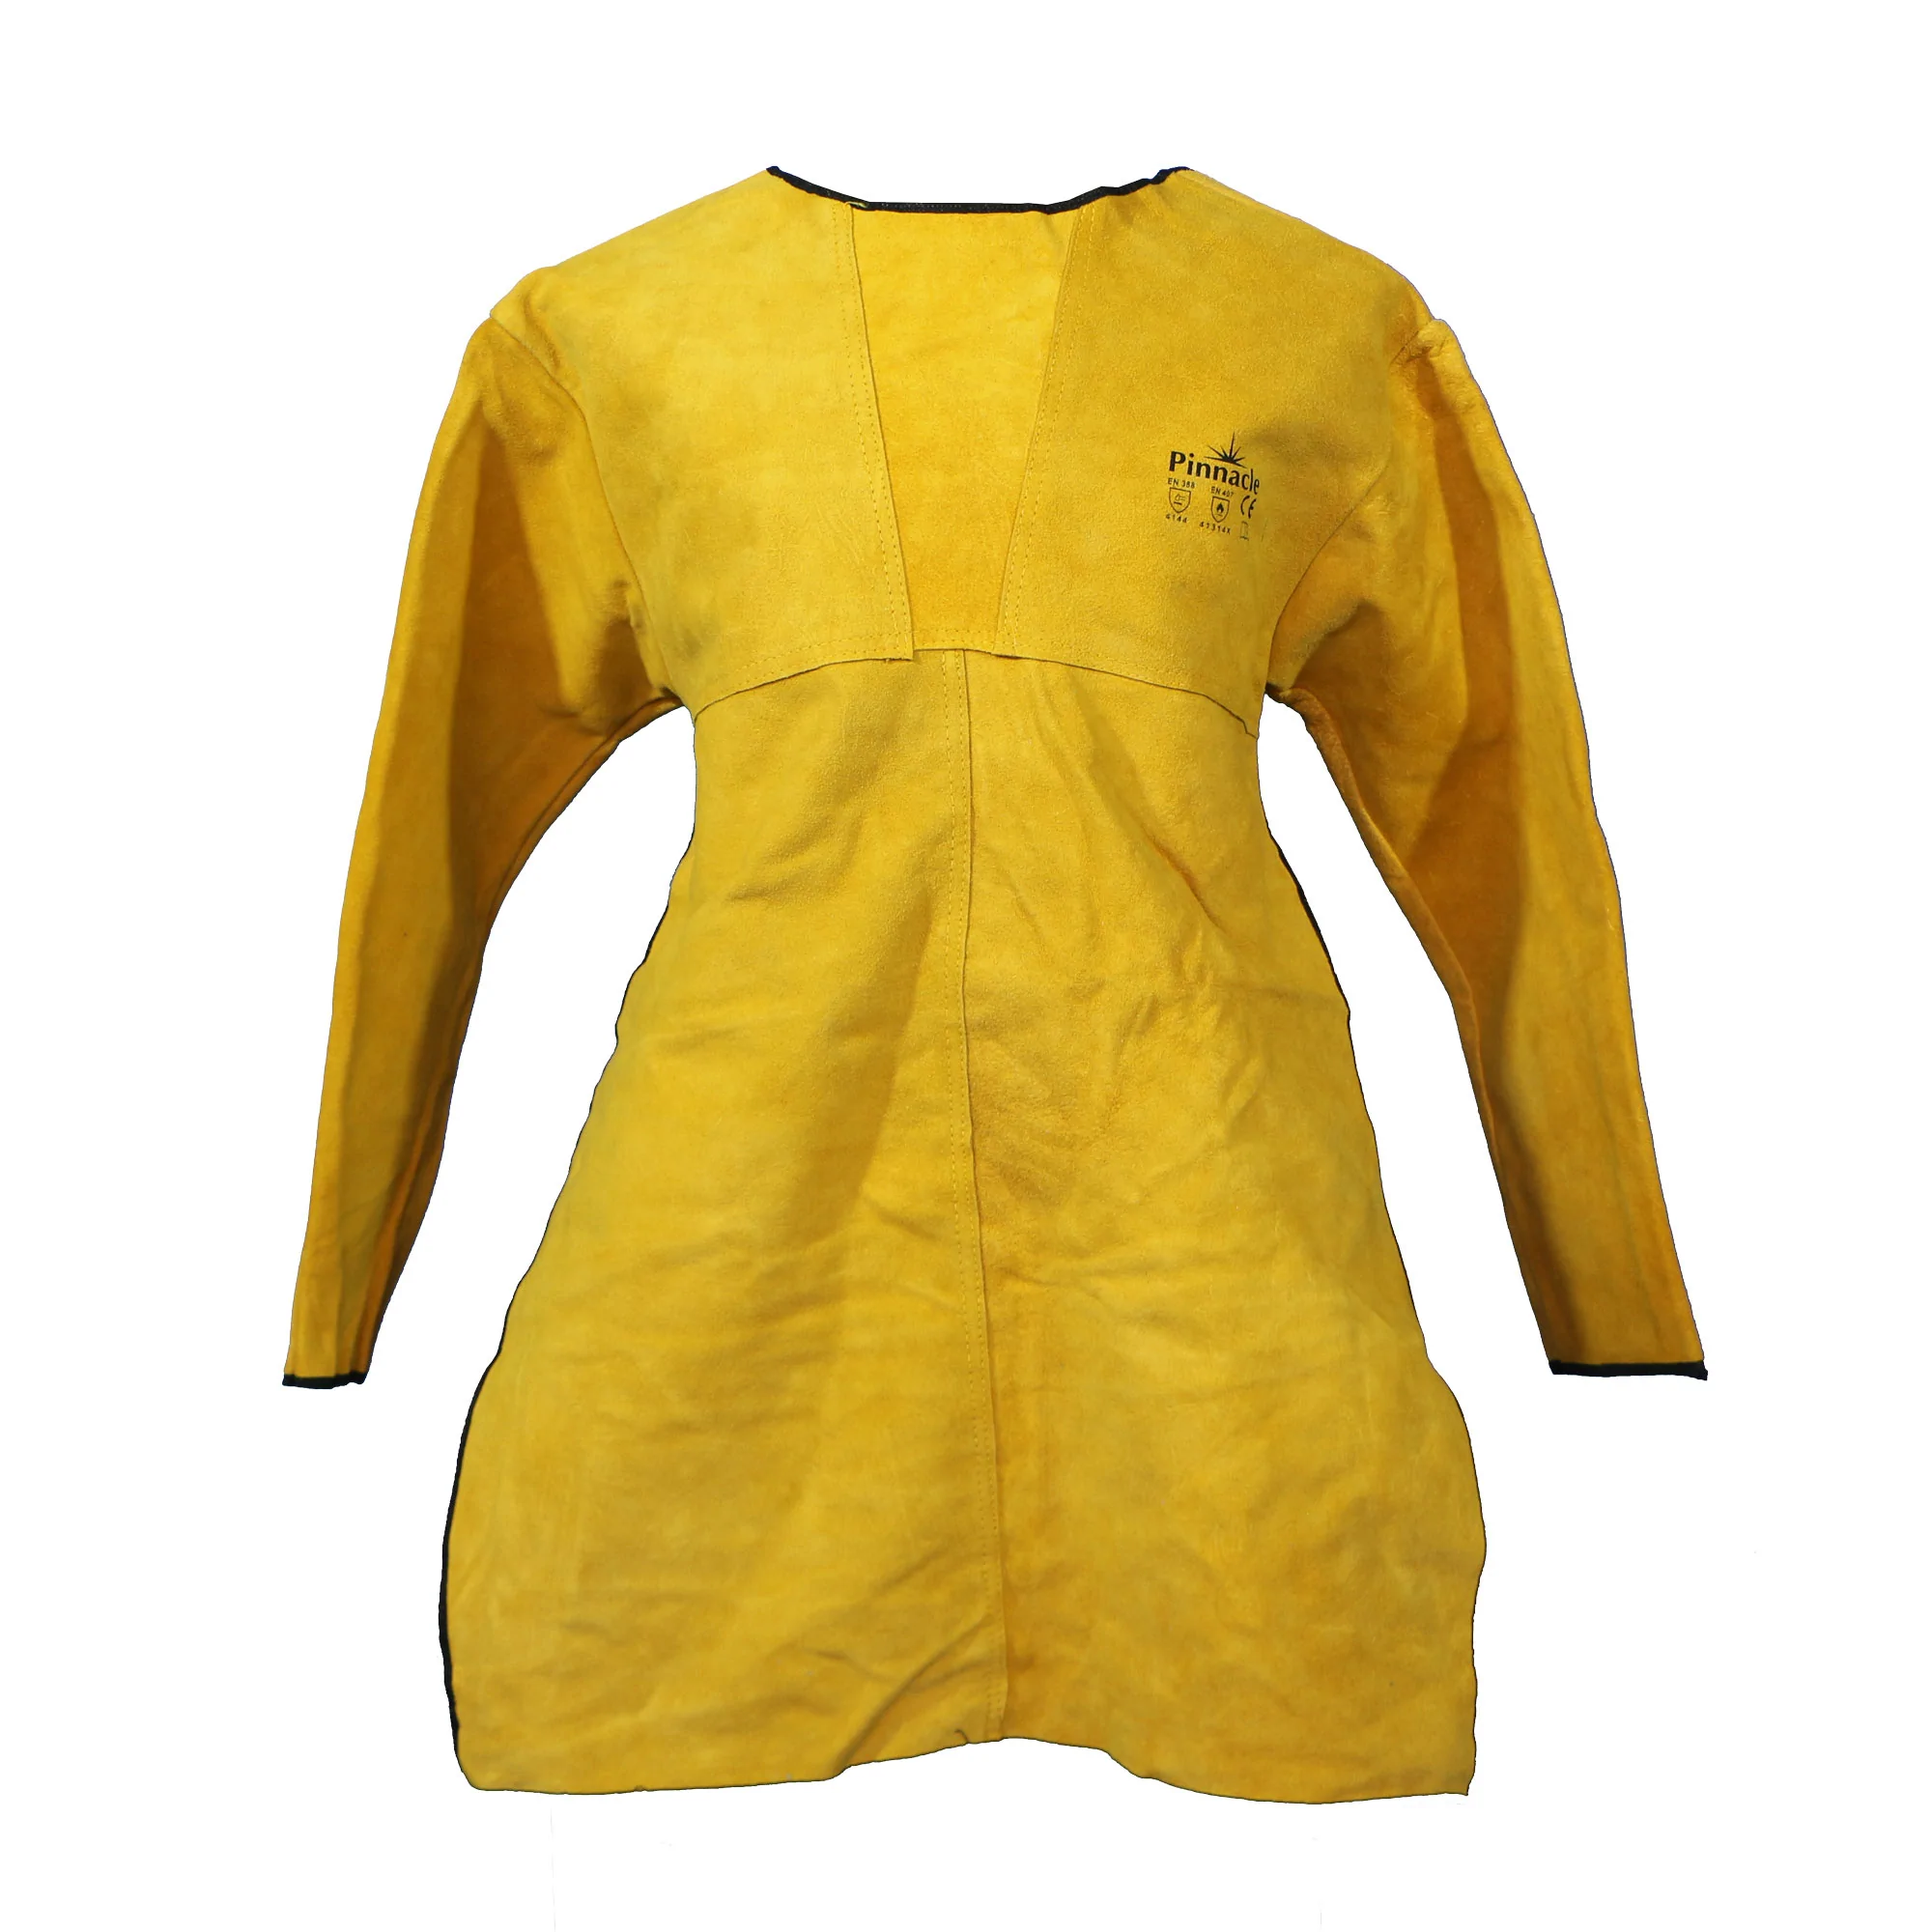 Yellow suede leather welding yoke & apron in one